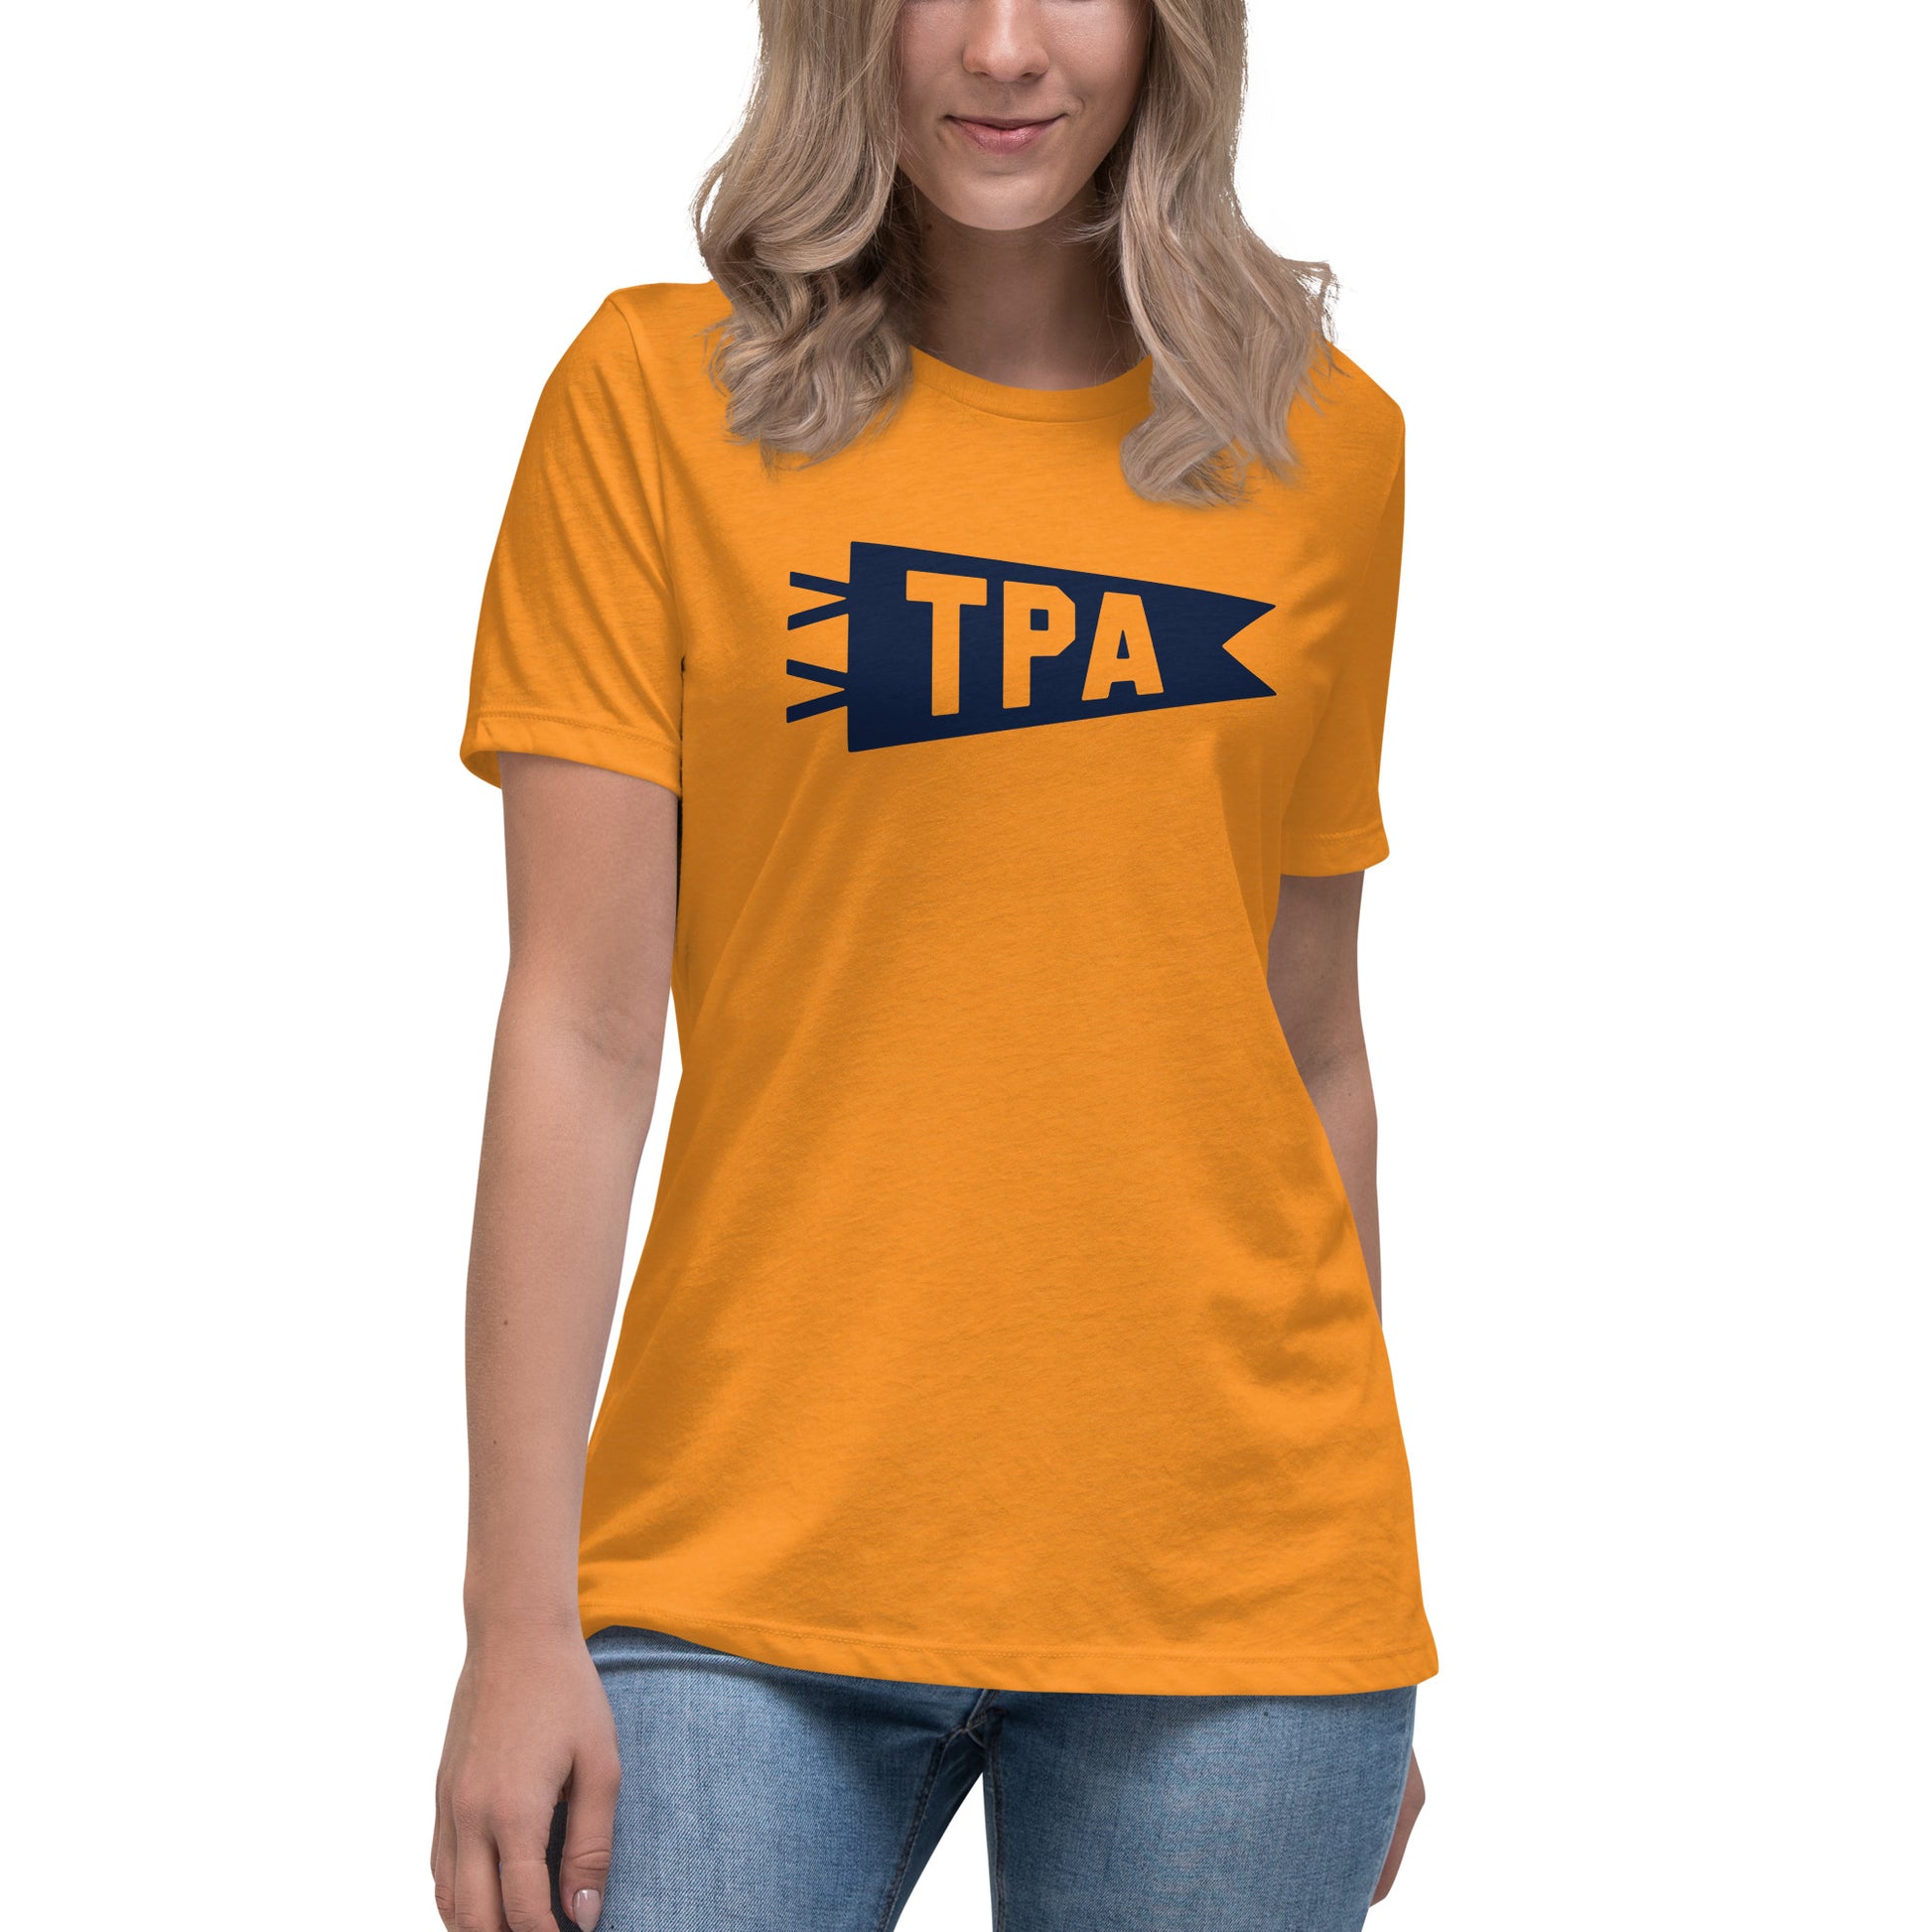 Airport Code Women's Tee - Navy Blue Graphic • TPA Tampa • YHM Designs - Image 04